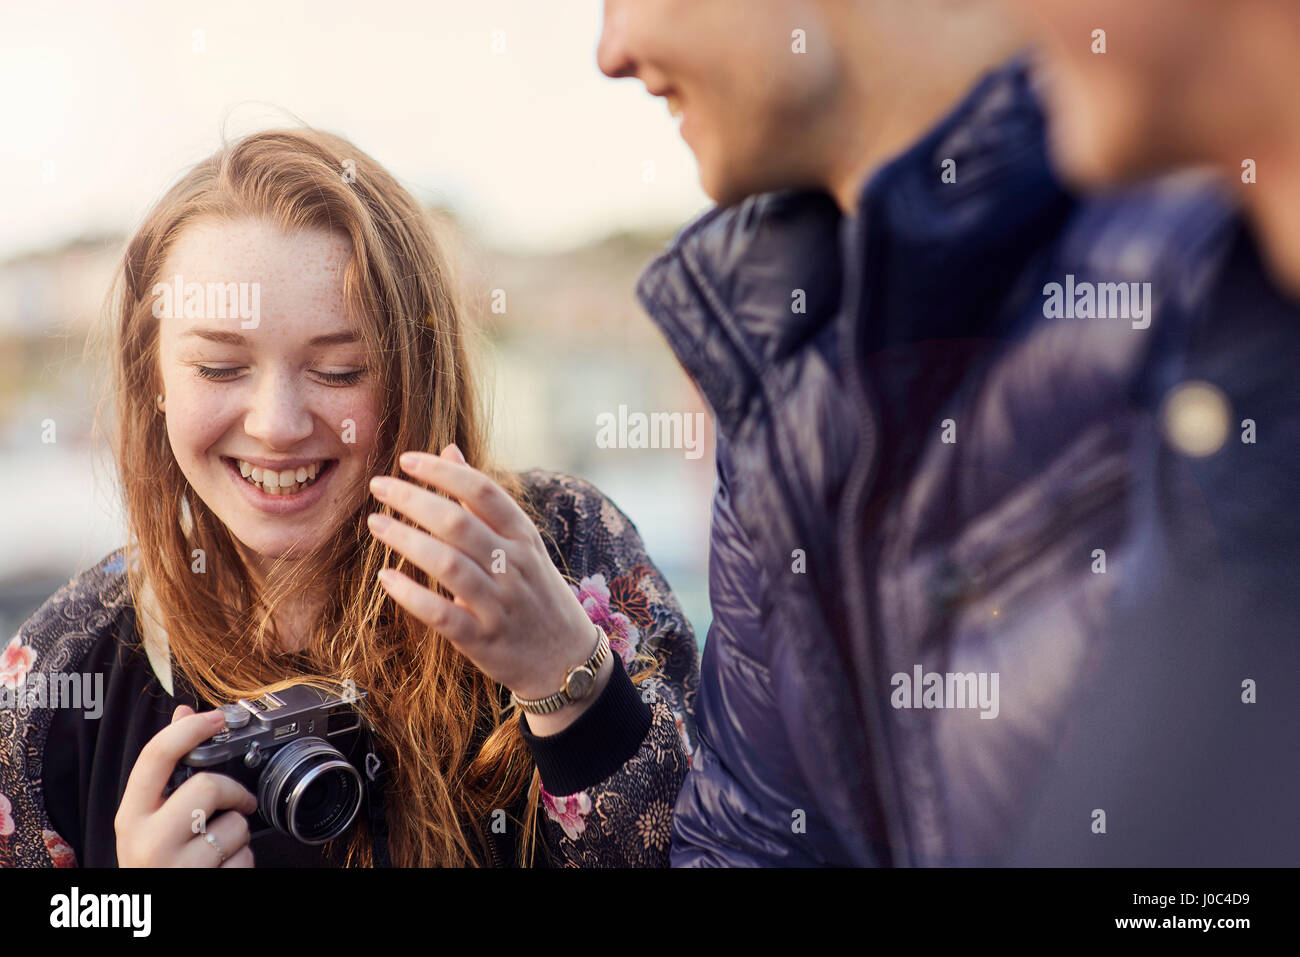 Three friends outdoors, young woman holding camera, laughing, Bristol, UK Stock Photo